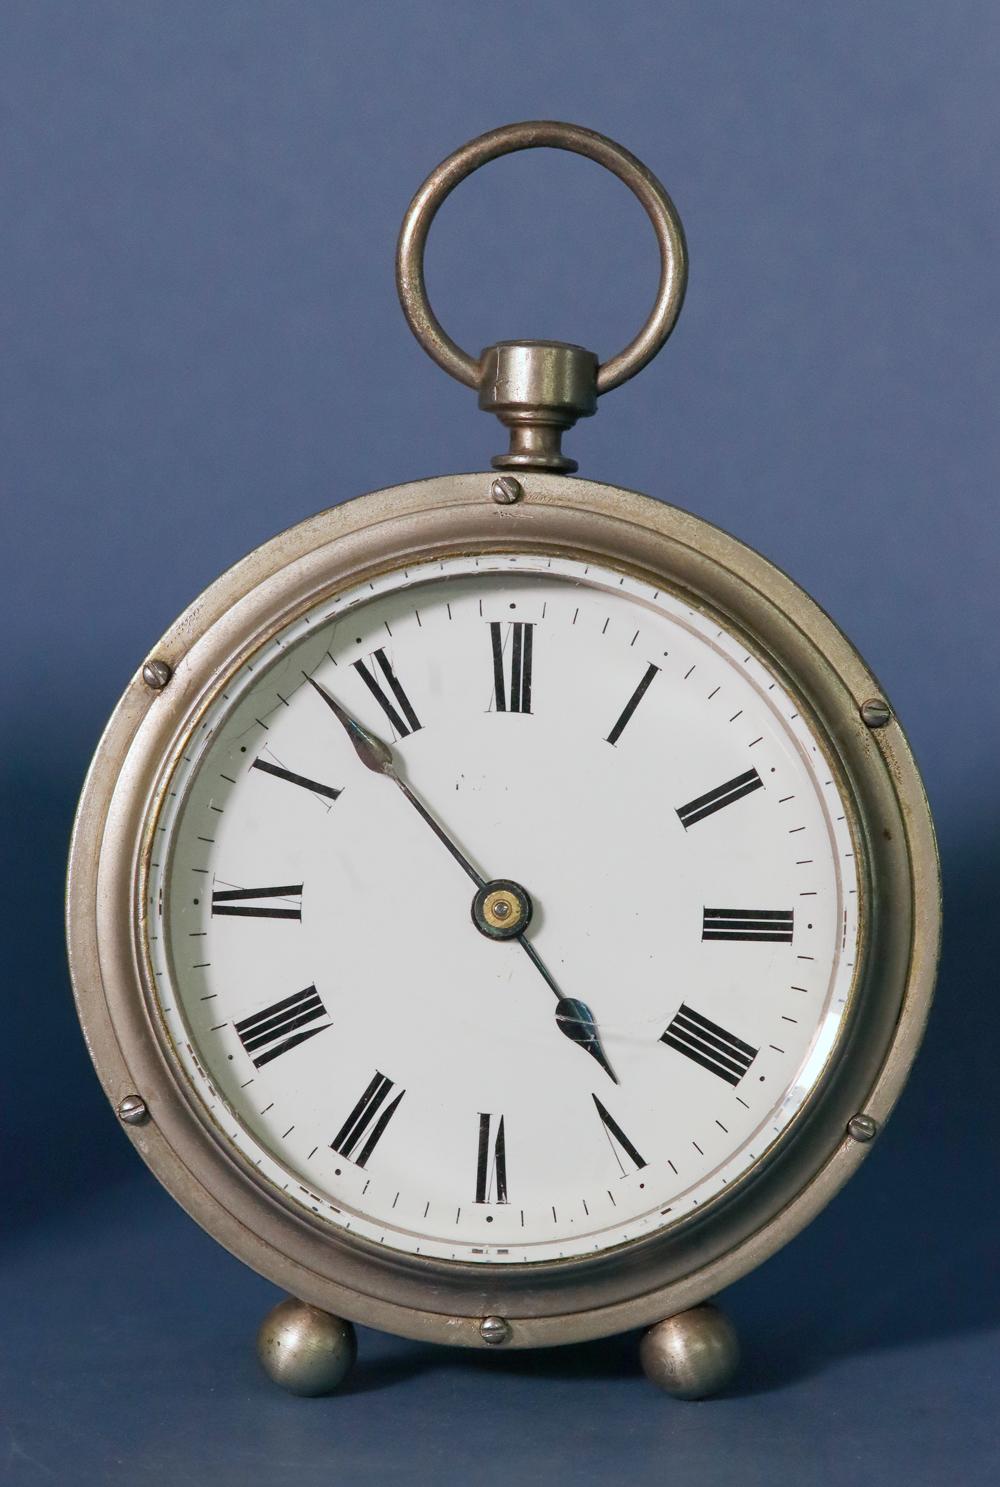 Rare French Drum Carriage Clock with Unusual Escapement. F333

RED, No.25.

The nickel drum shaped case has shaped posts screwed to the front and back, a shuttered back, a glass tube that protects the movement, a ring to the top and small ball